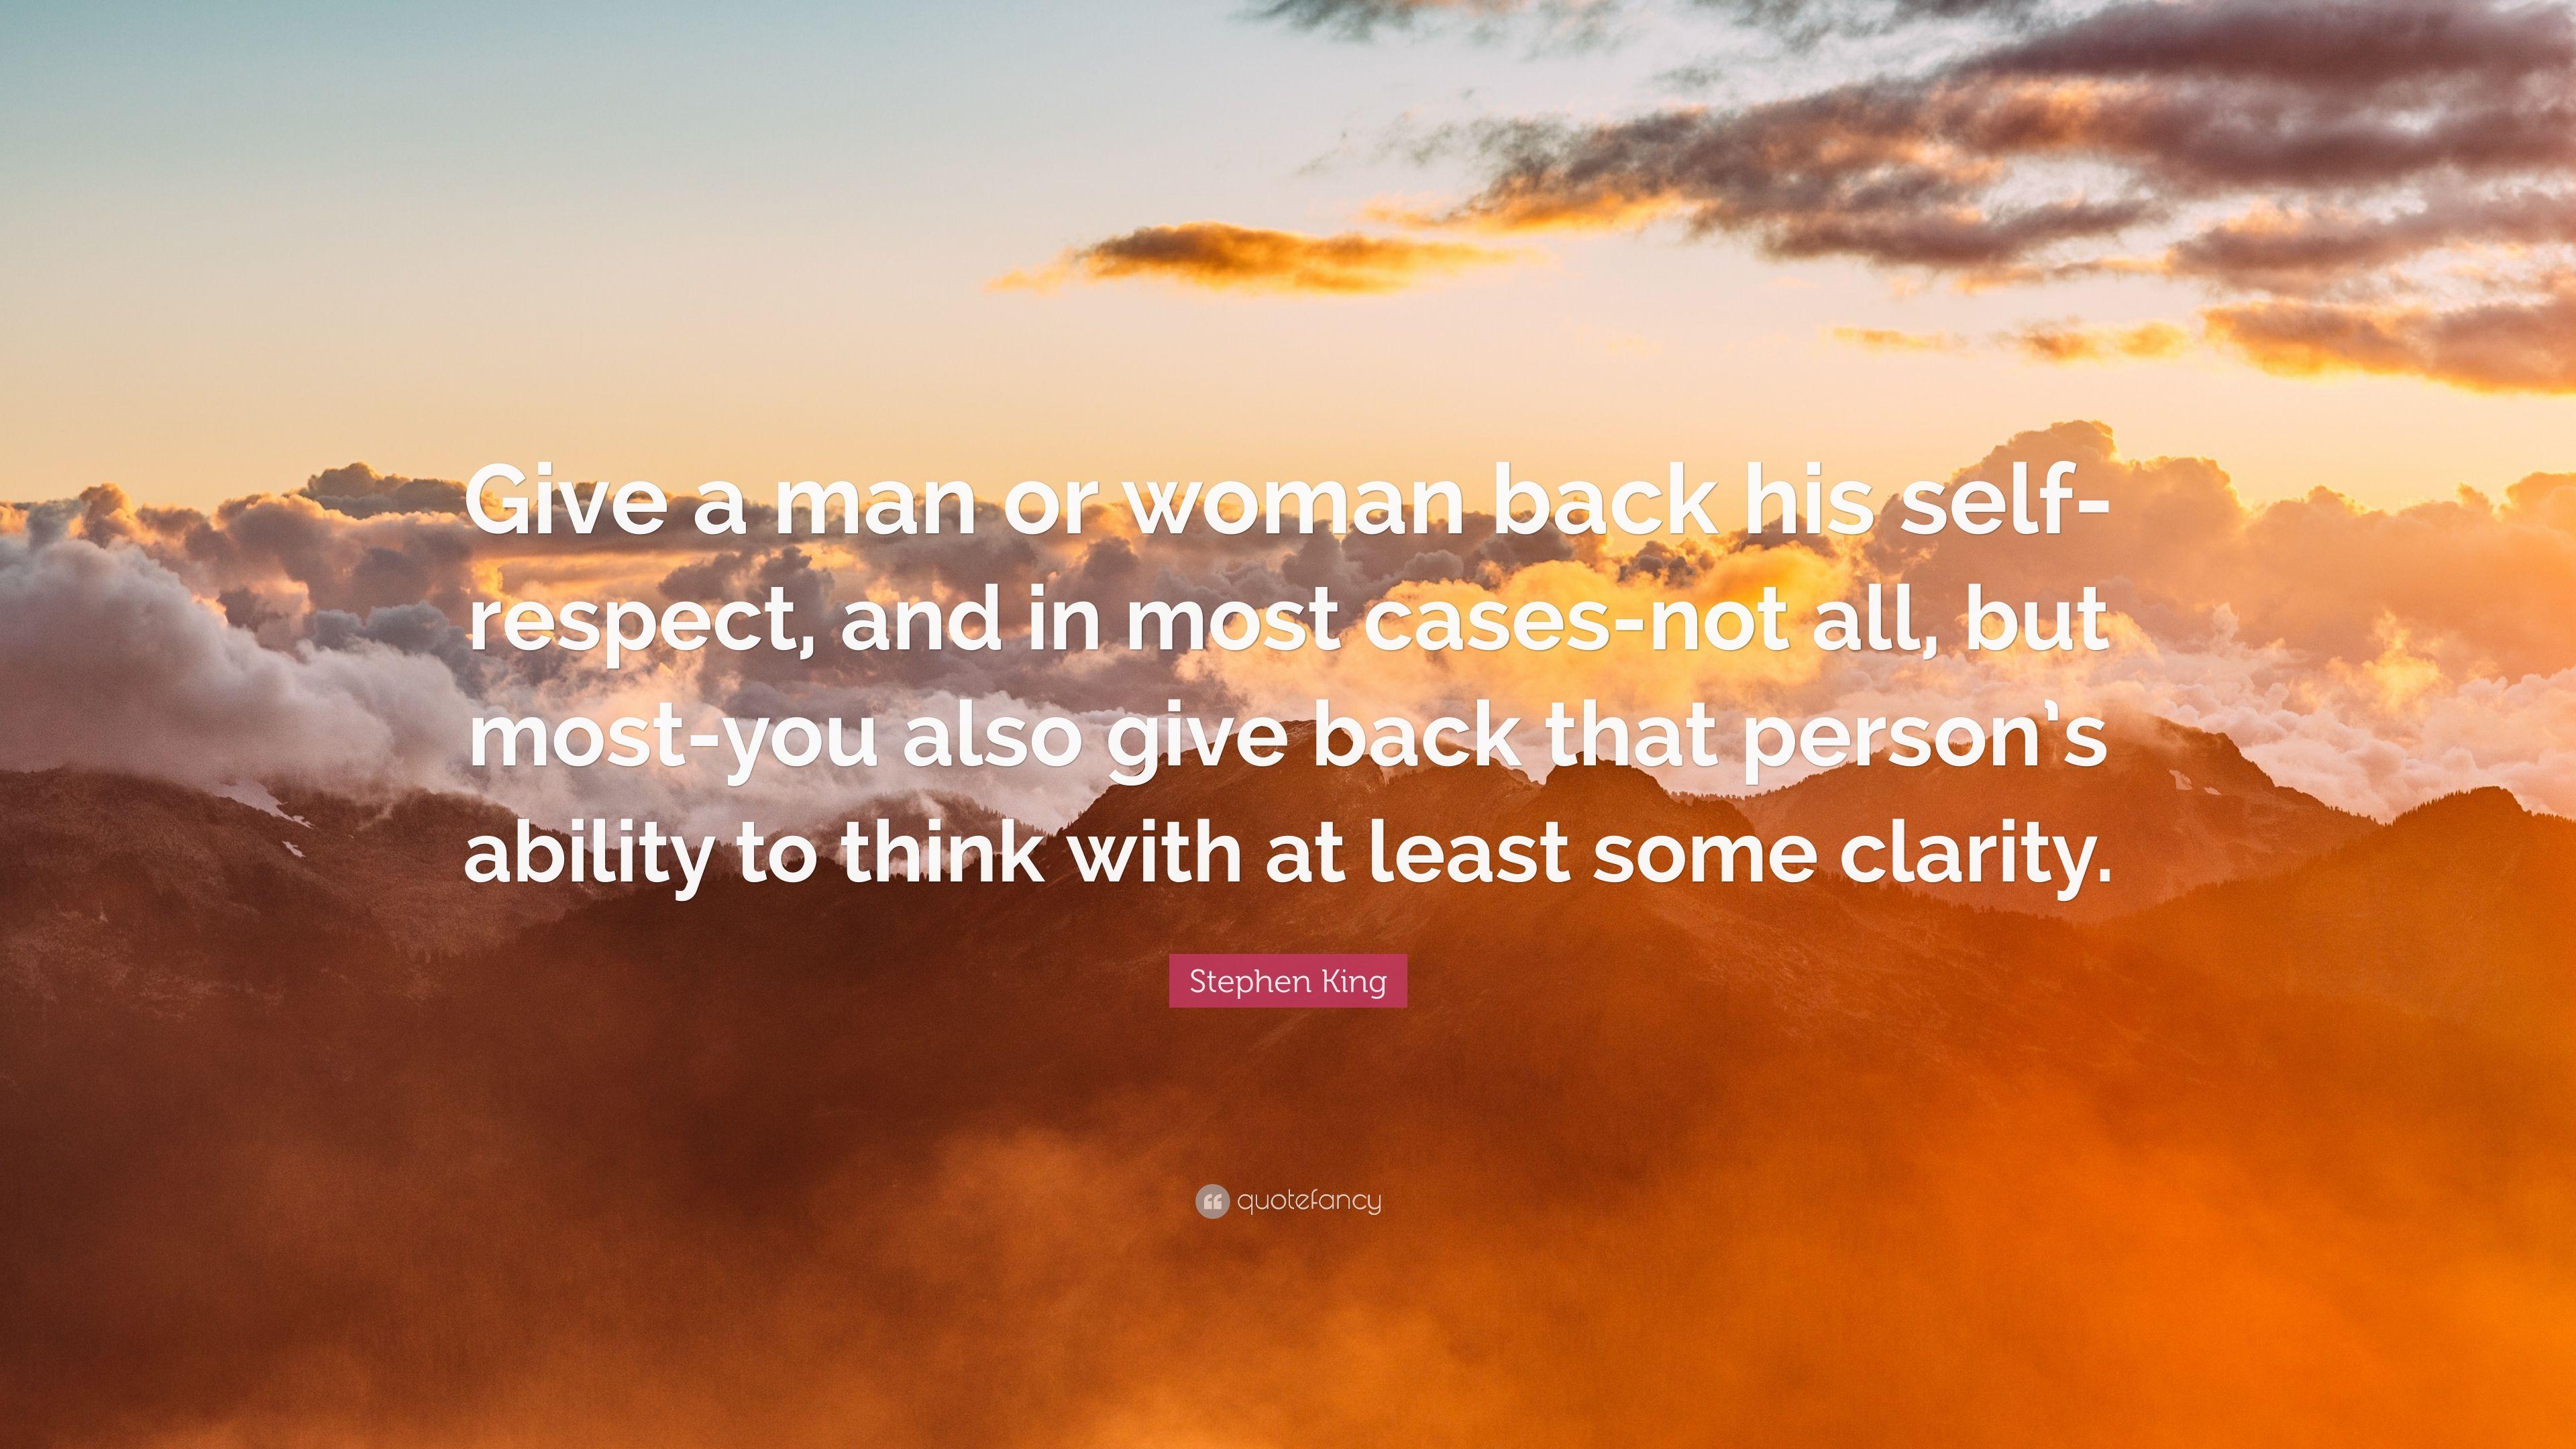 Stephen King Quote: “Give A Man Or Woman Back His Self Respect